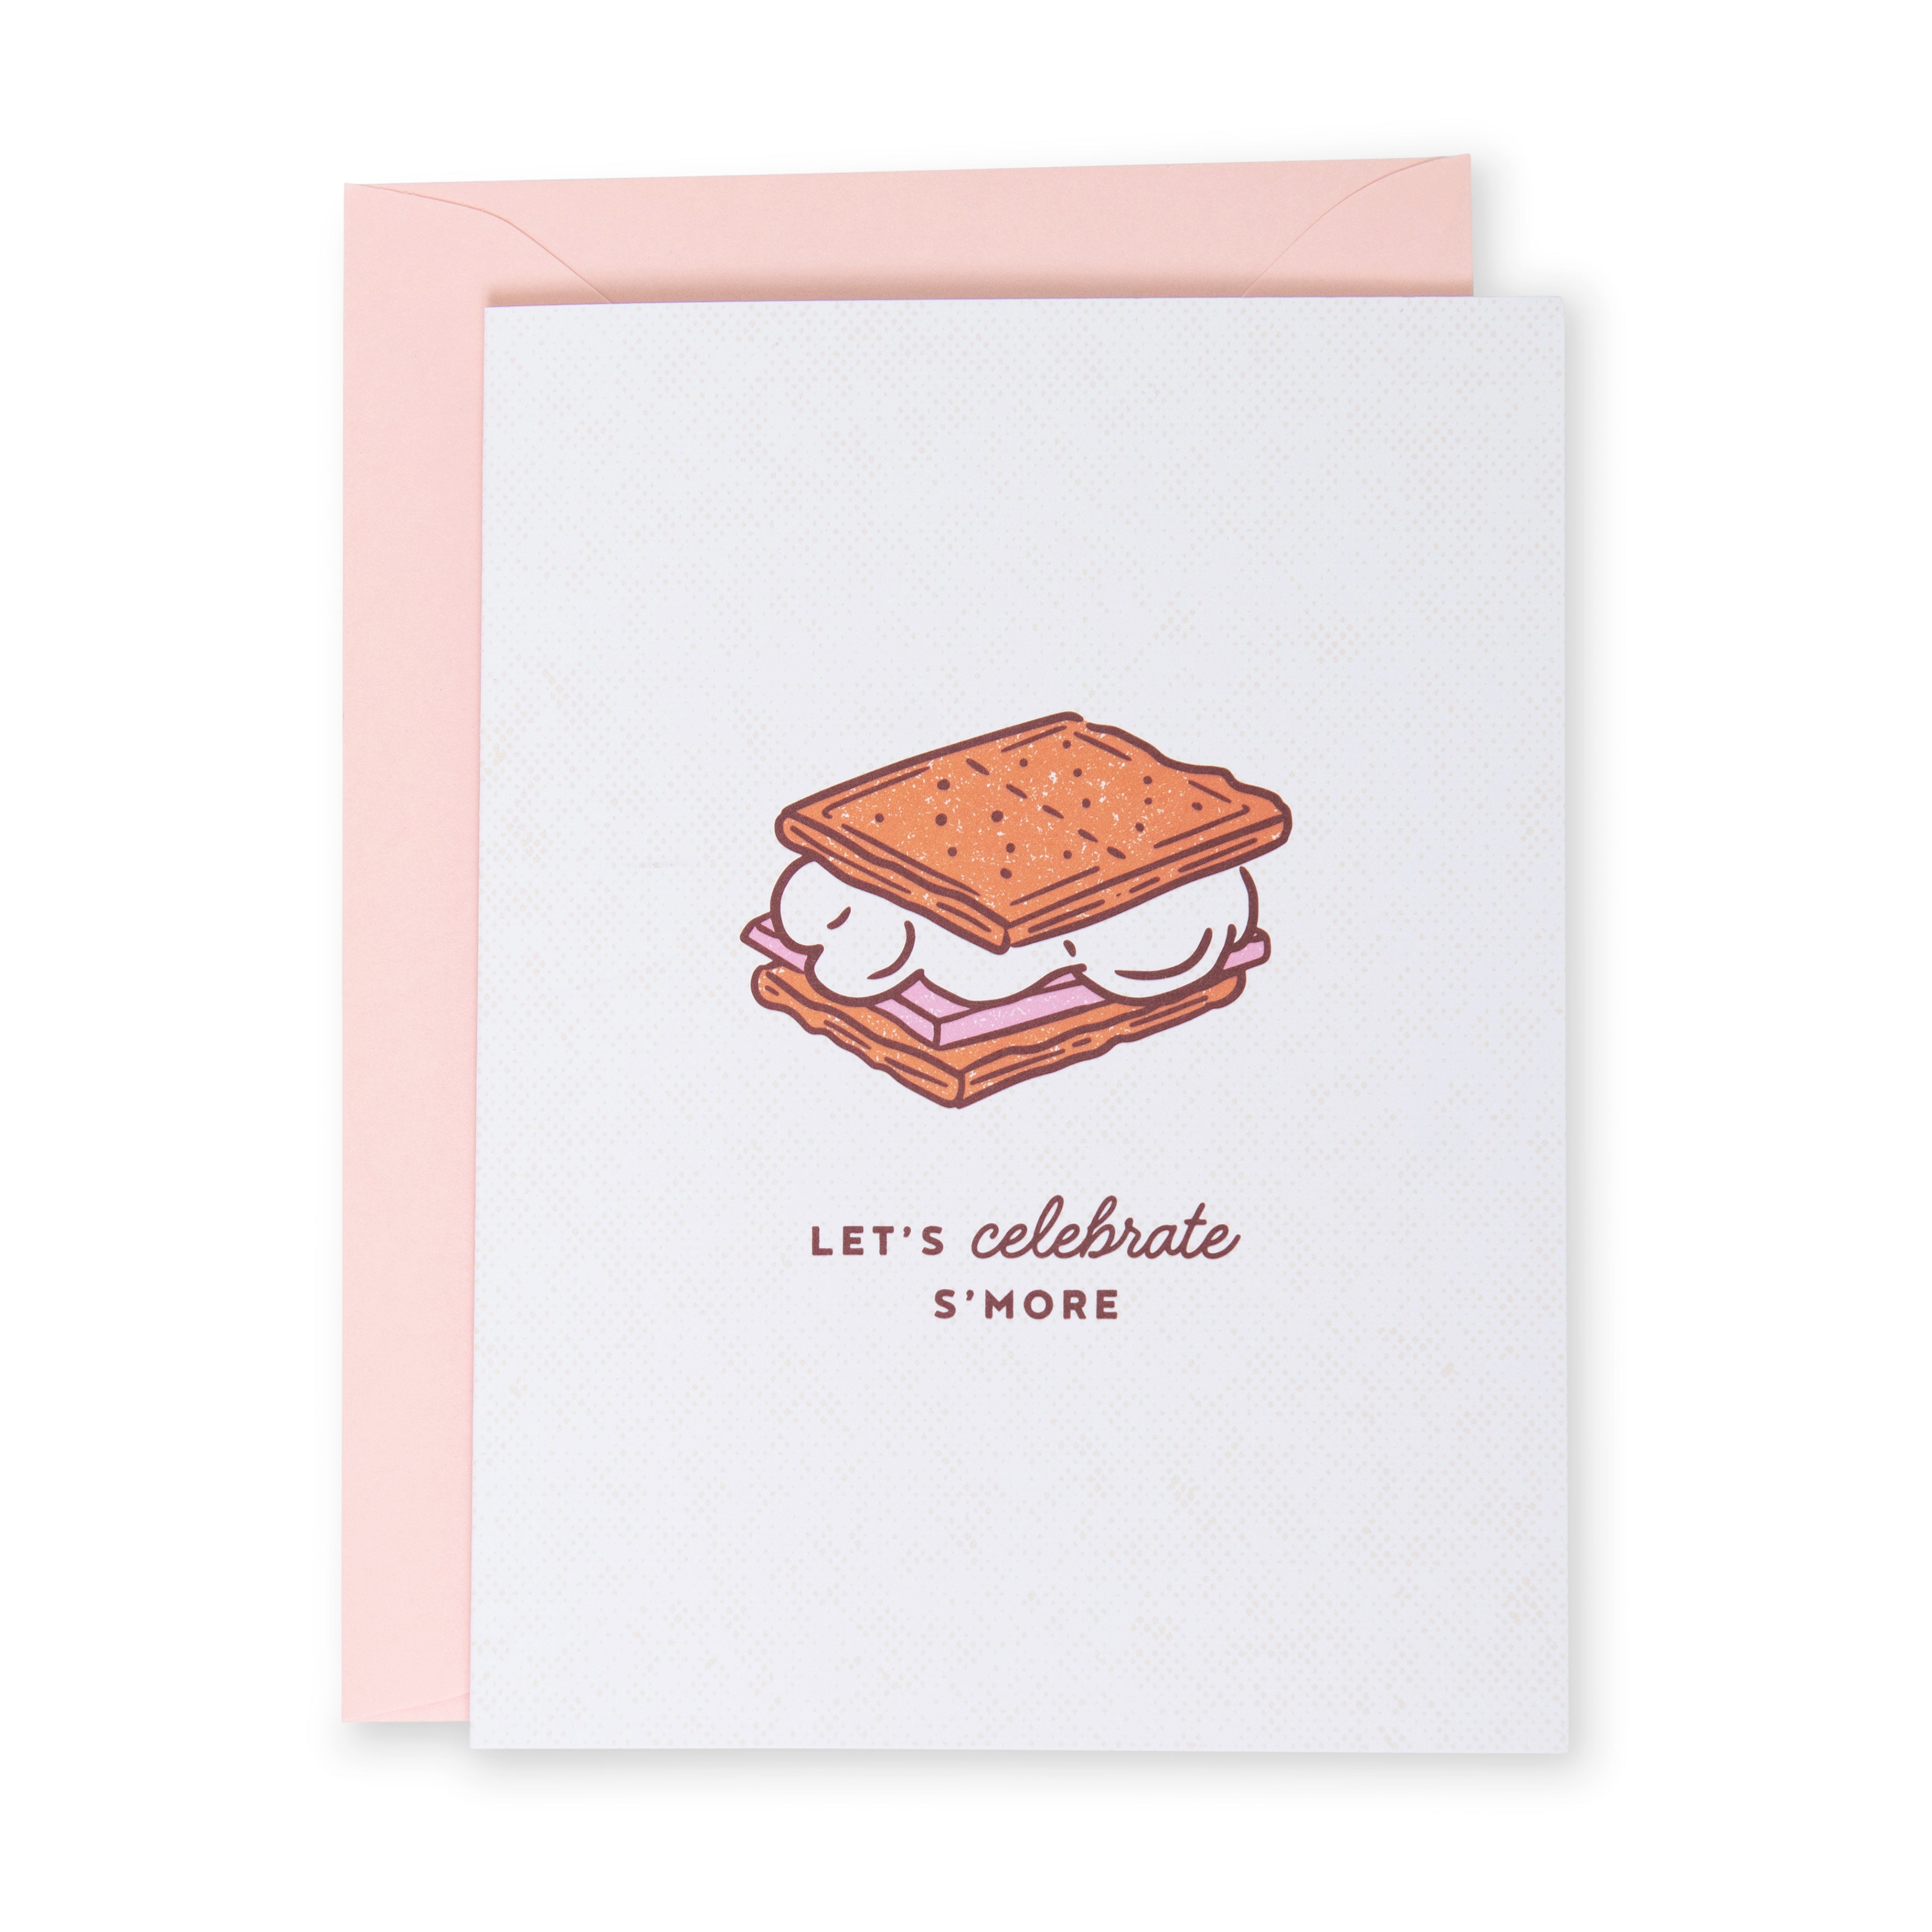 "Let's celebrate s'more" Toast Card